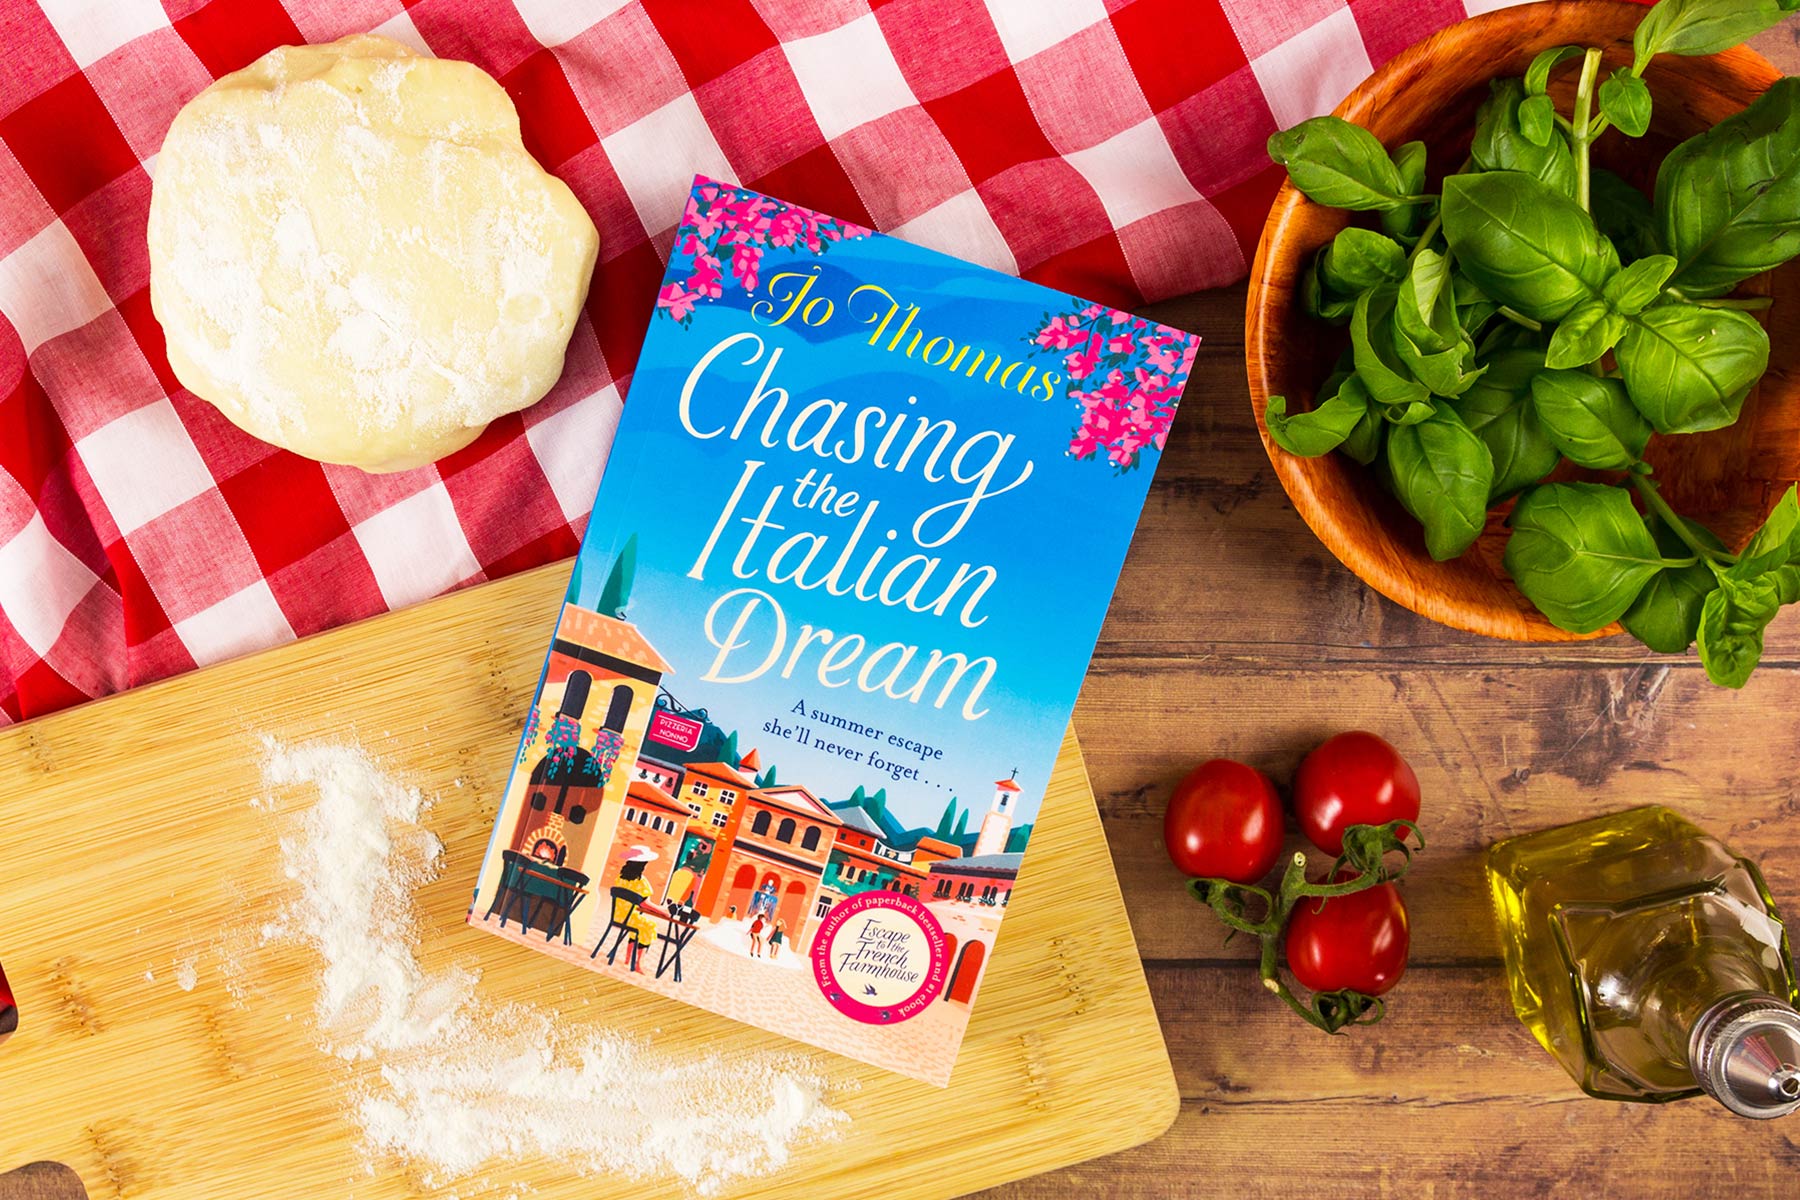 The book Chasing the Italian Dream on an Italian-style table with tomatoes, basil and more.